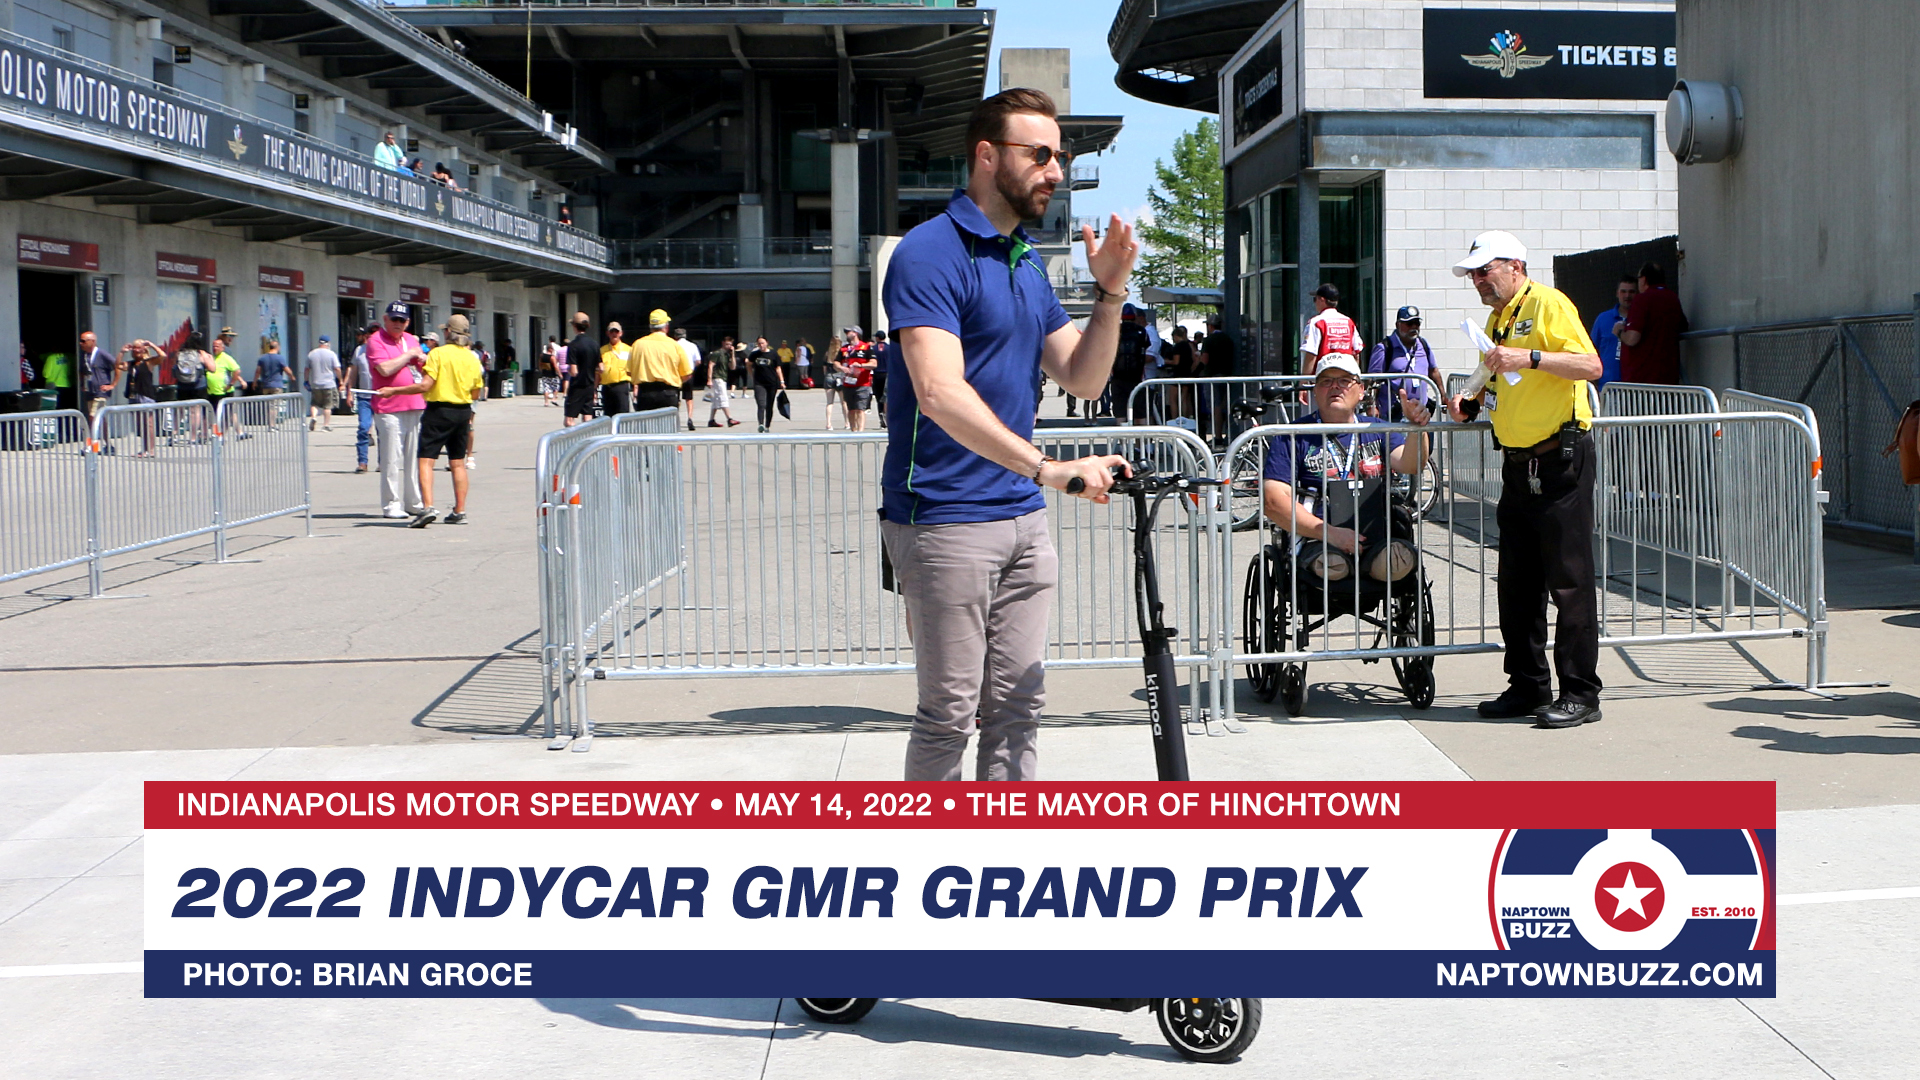 Mayor of Hinchtown on Indy Car Grand Prix Race Day, May 14, 2022